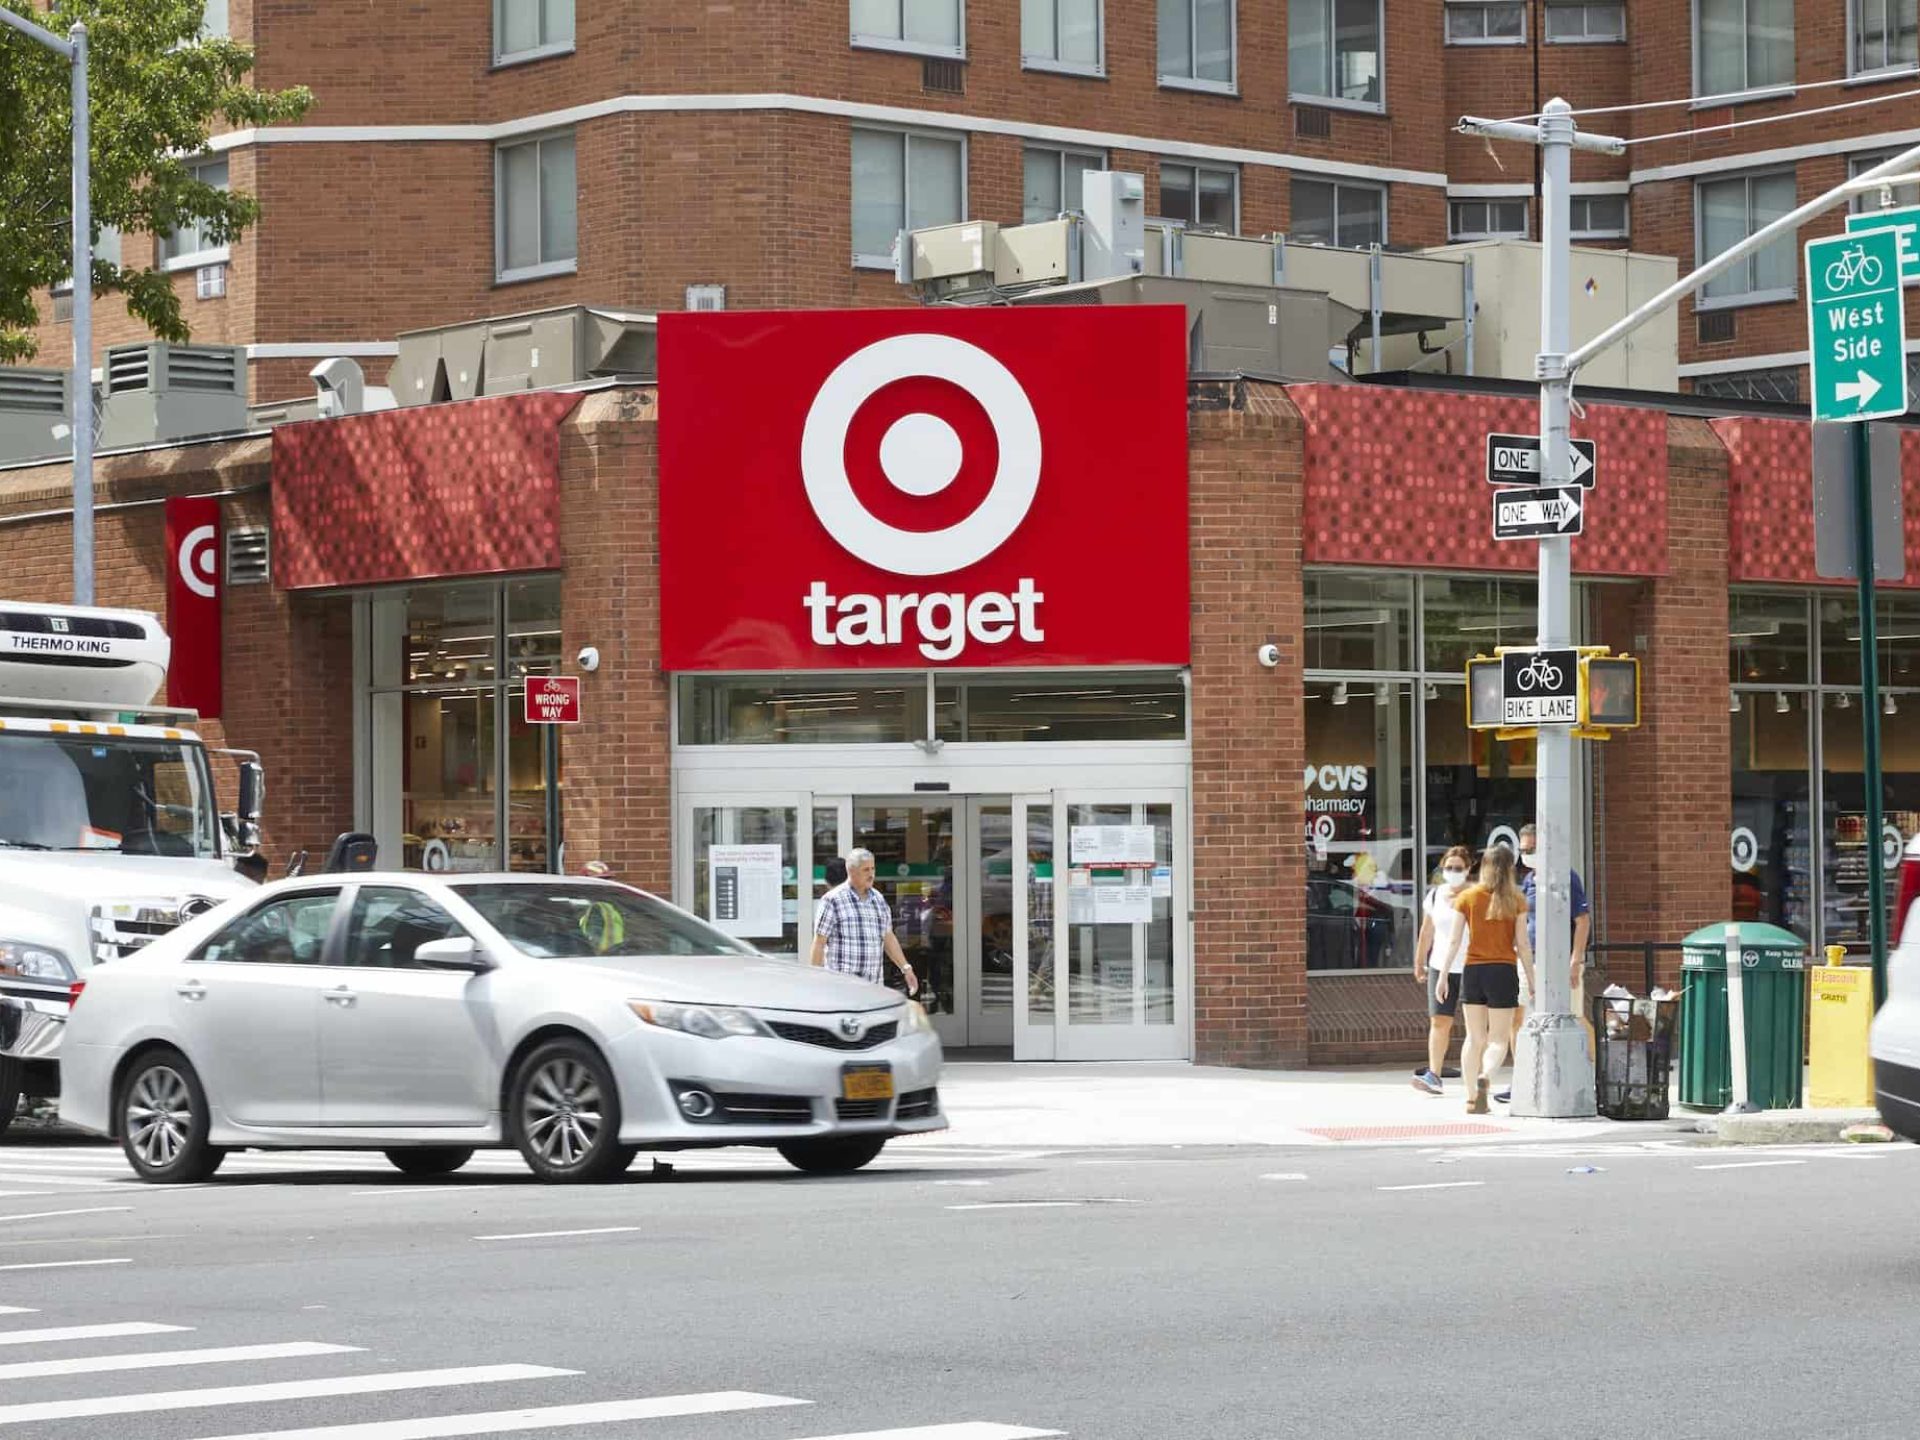 Street view of Target in Murray Hill, New York. Large red Target sign above the double door entrance and people walking.